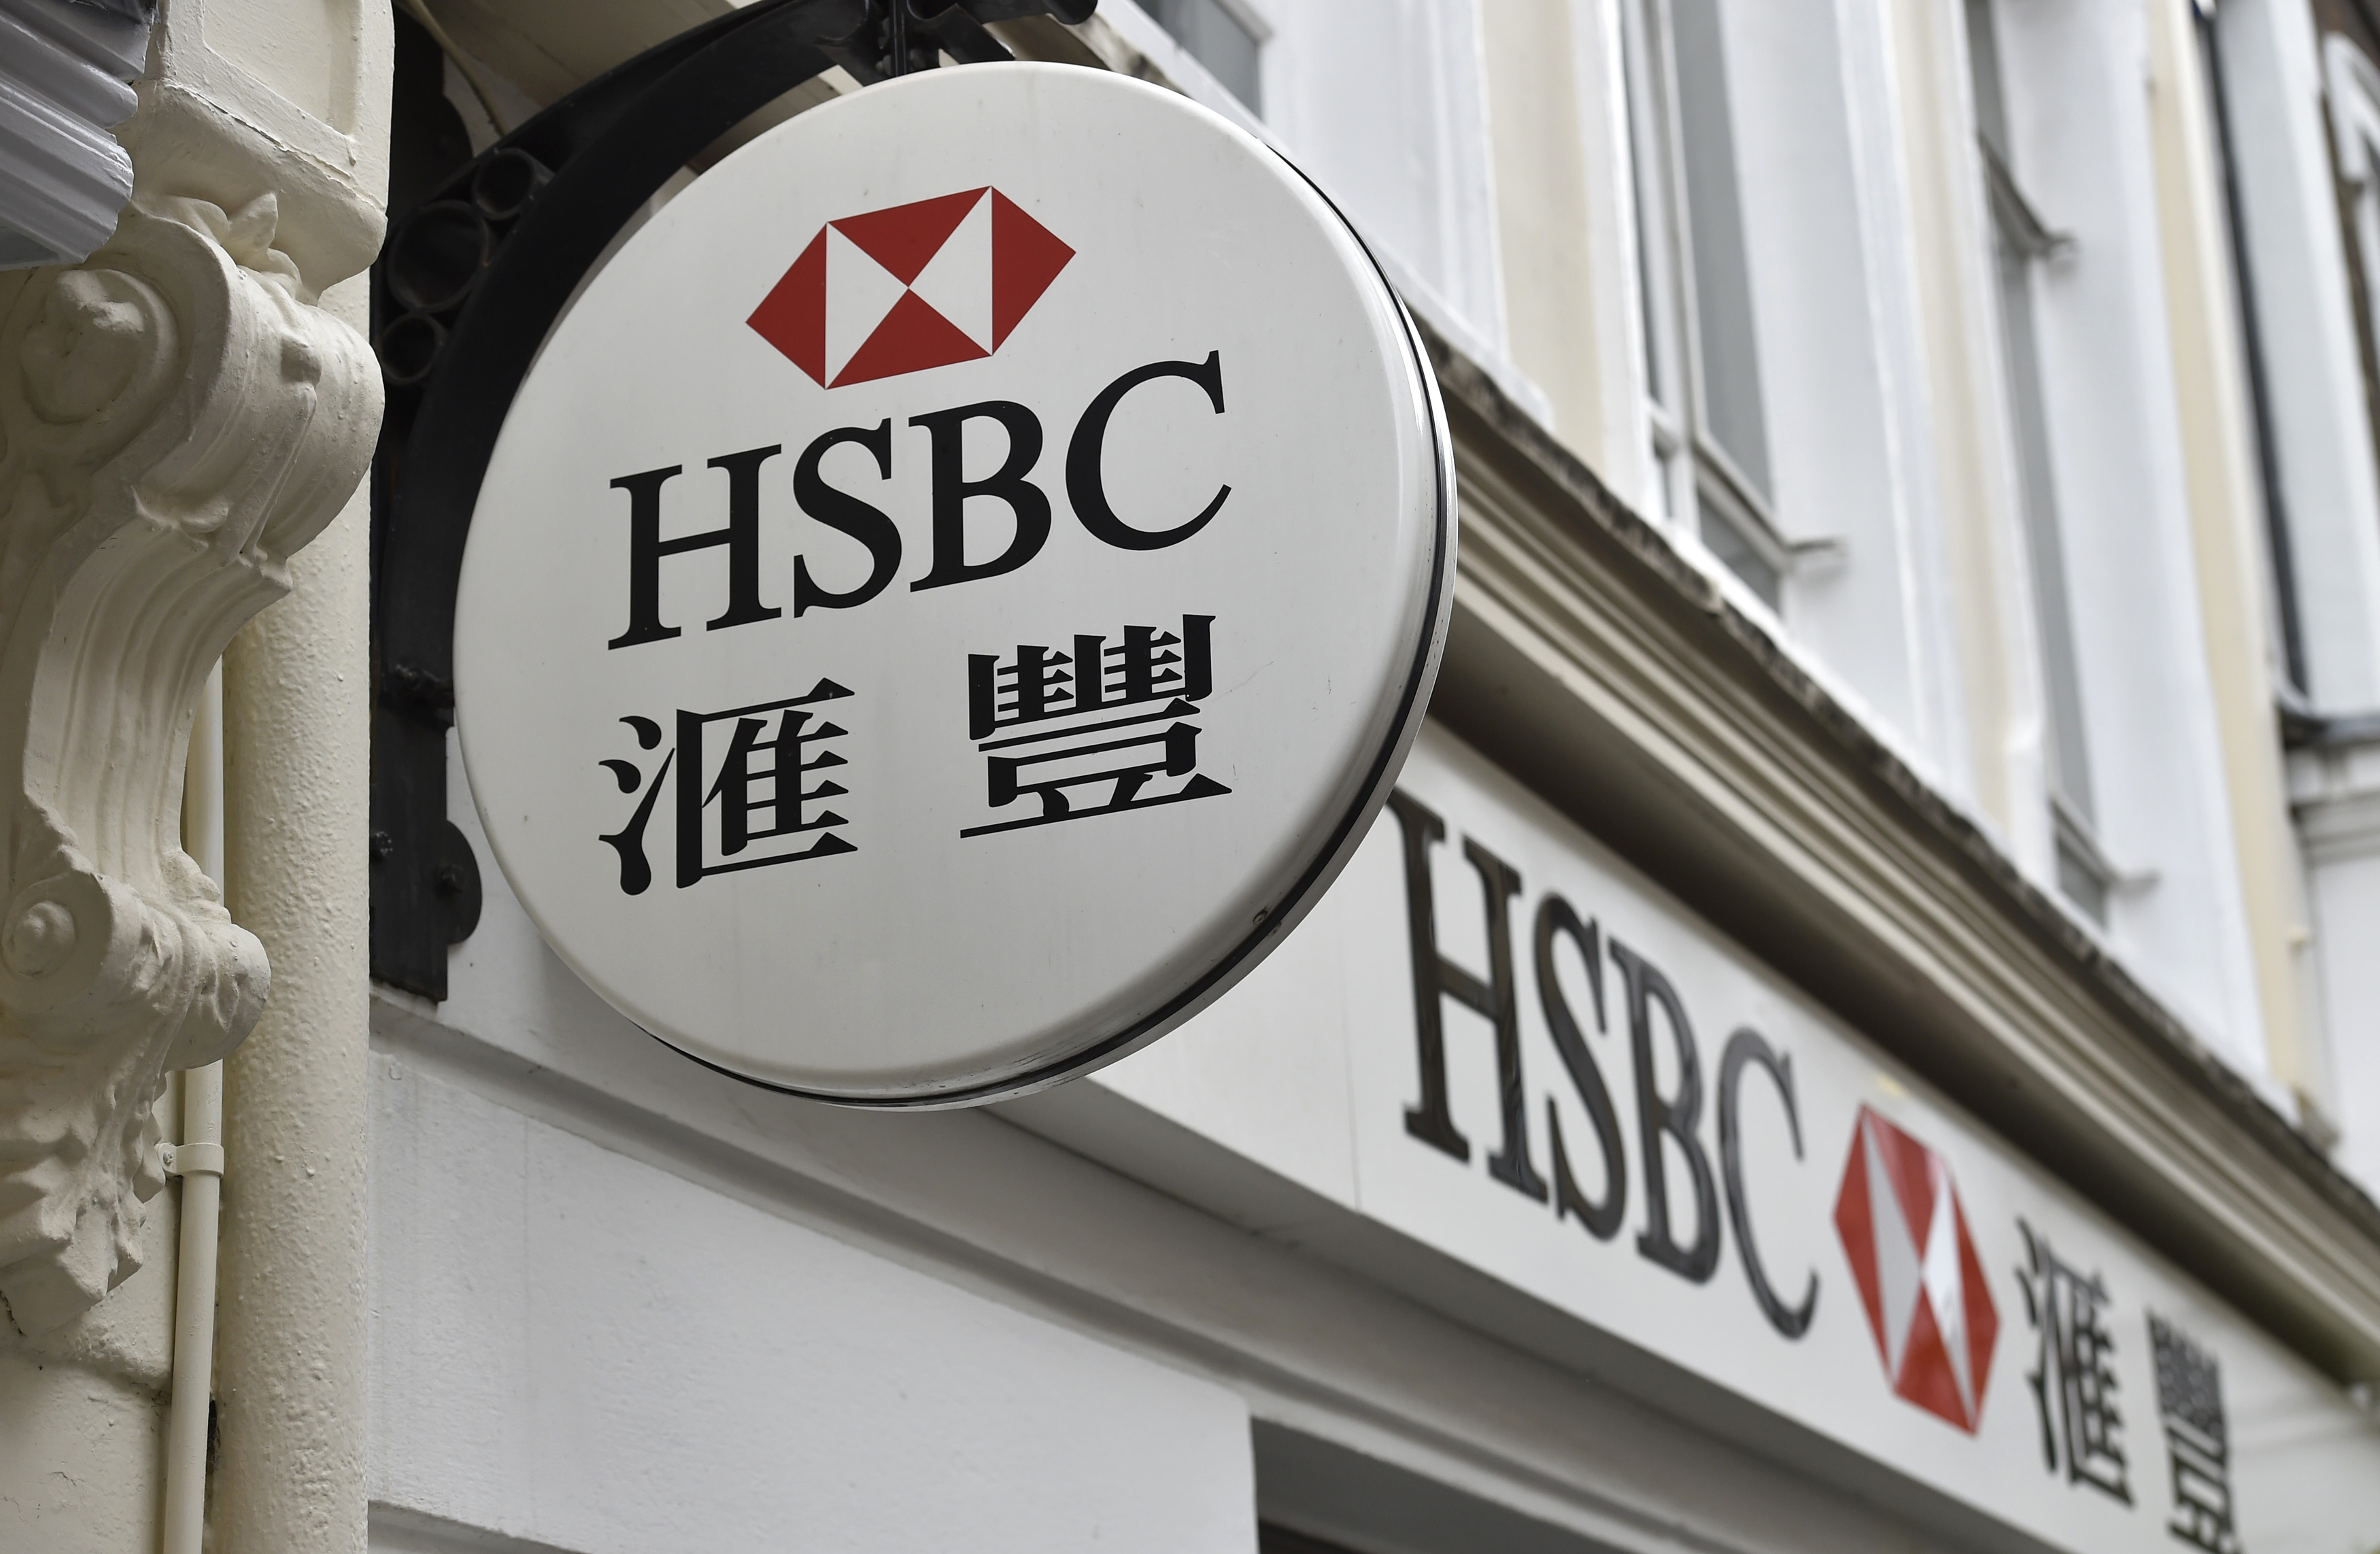 A branch of HSBC is seen in Chinatown in central London June 9, 2015 (Toby Melville — Reuters)